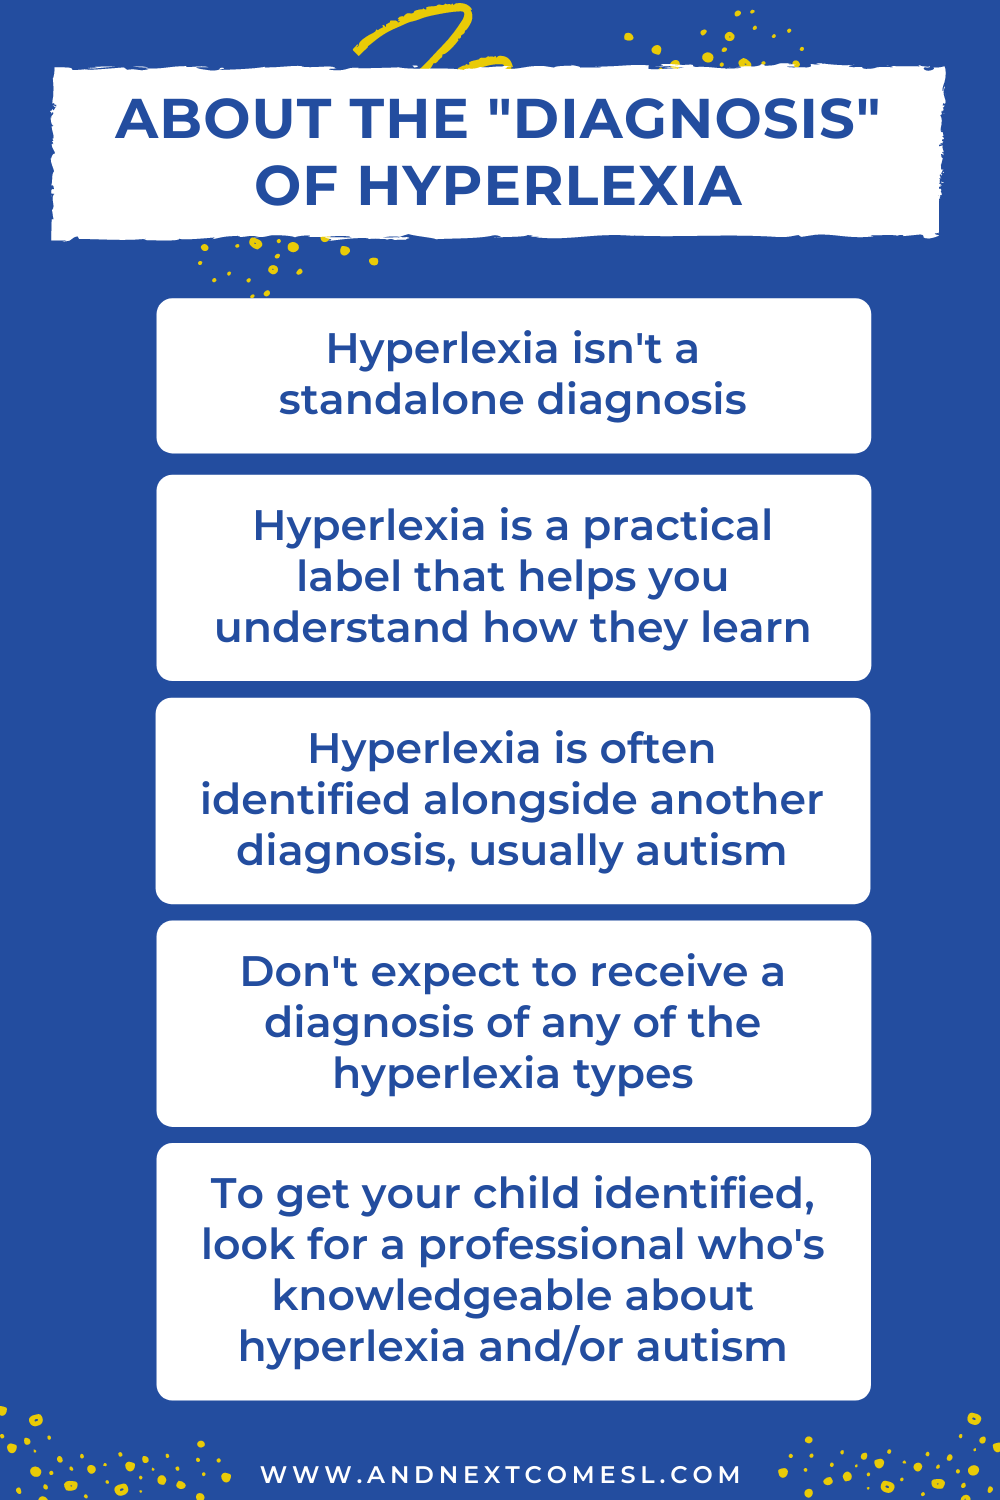 What you need to know about the hyperlexia "diagnosis" and getting your child identified as hyperlexic